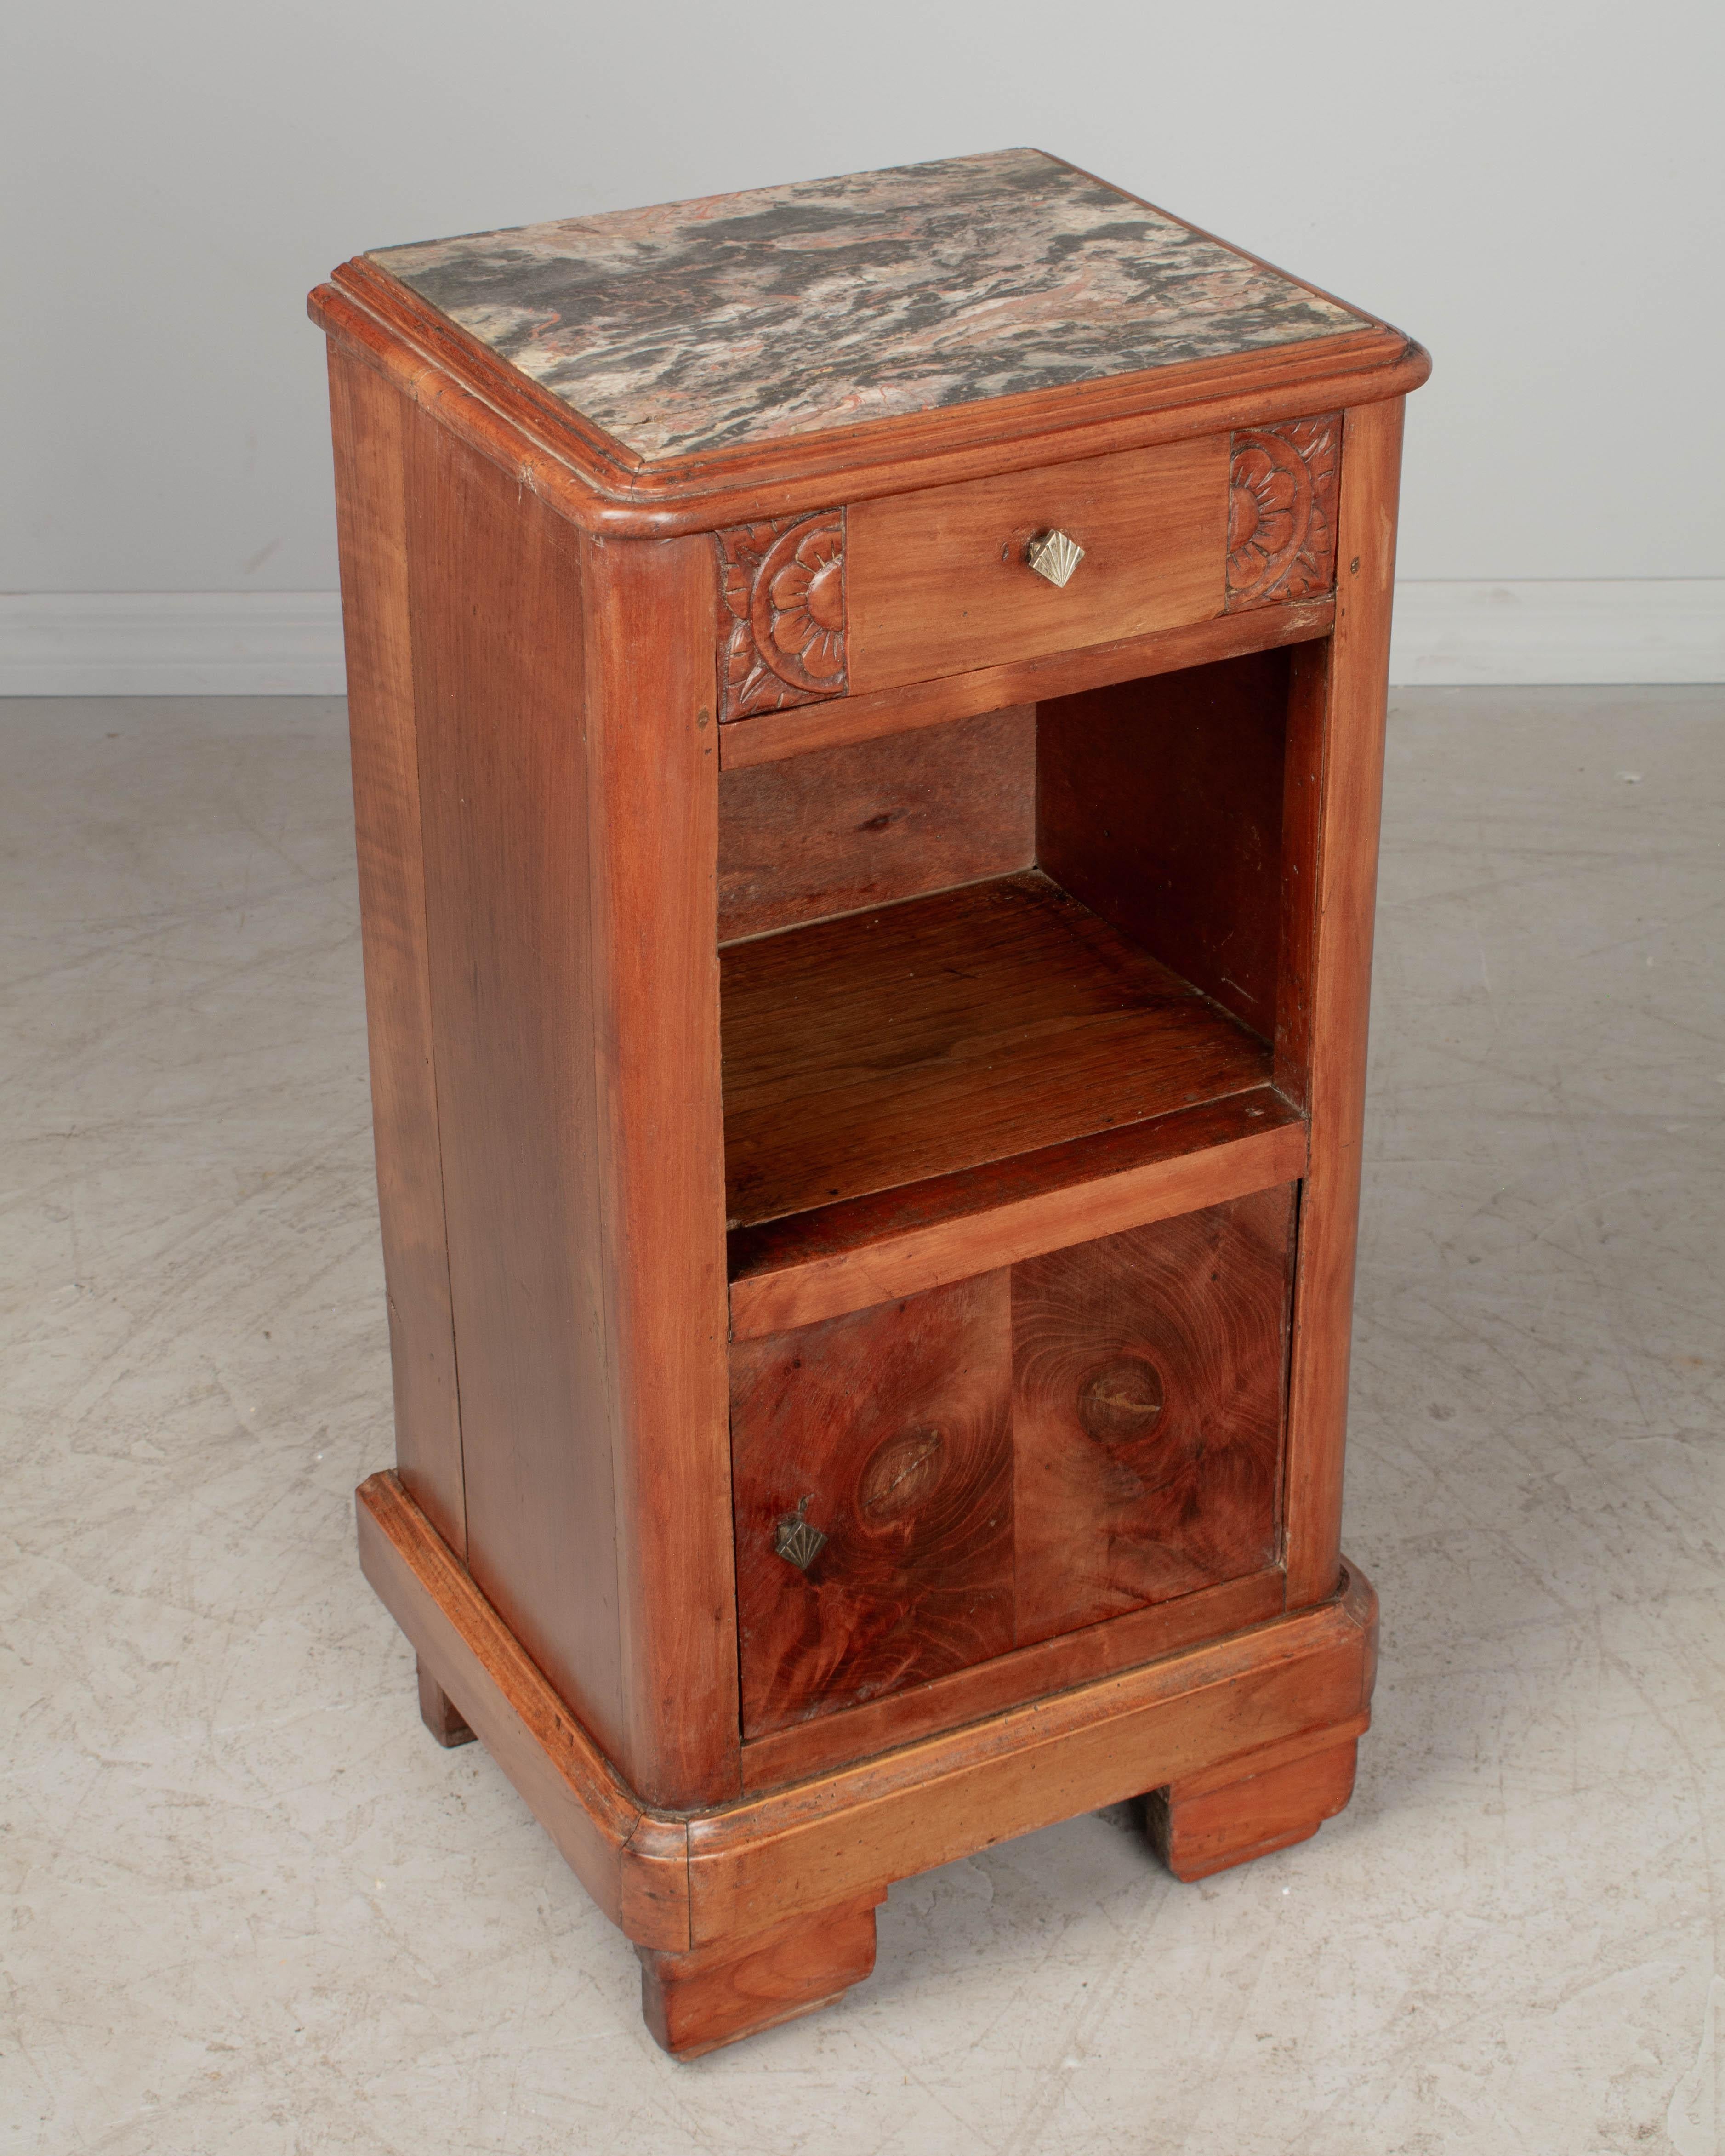 A French Art Deco nightstand made of solid cherry wood, with inset marble top. Dovetailed drawer with hand-carved stylized floral details. Open niche above a cabinet door with bookmatched walnut veneer panels. Nickel plated cast brass knobs. Good